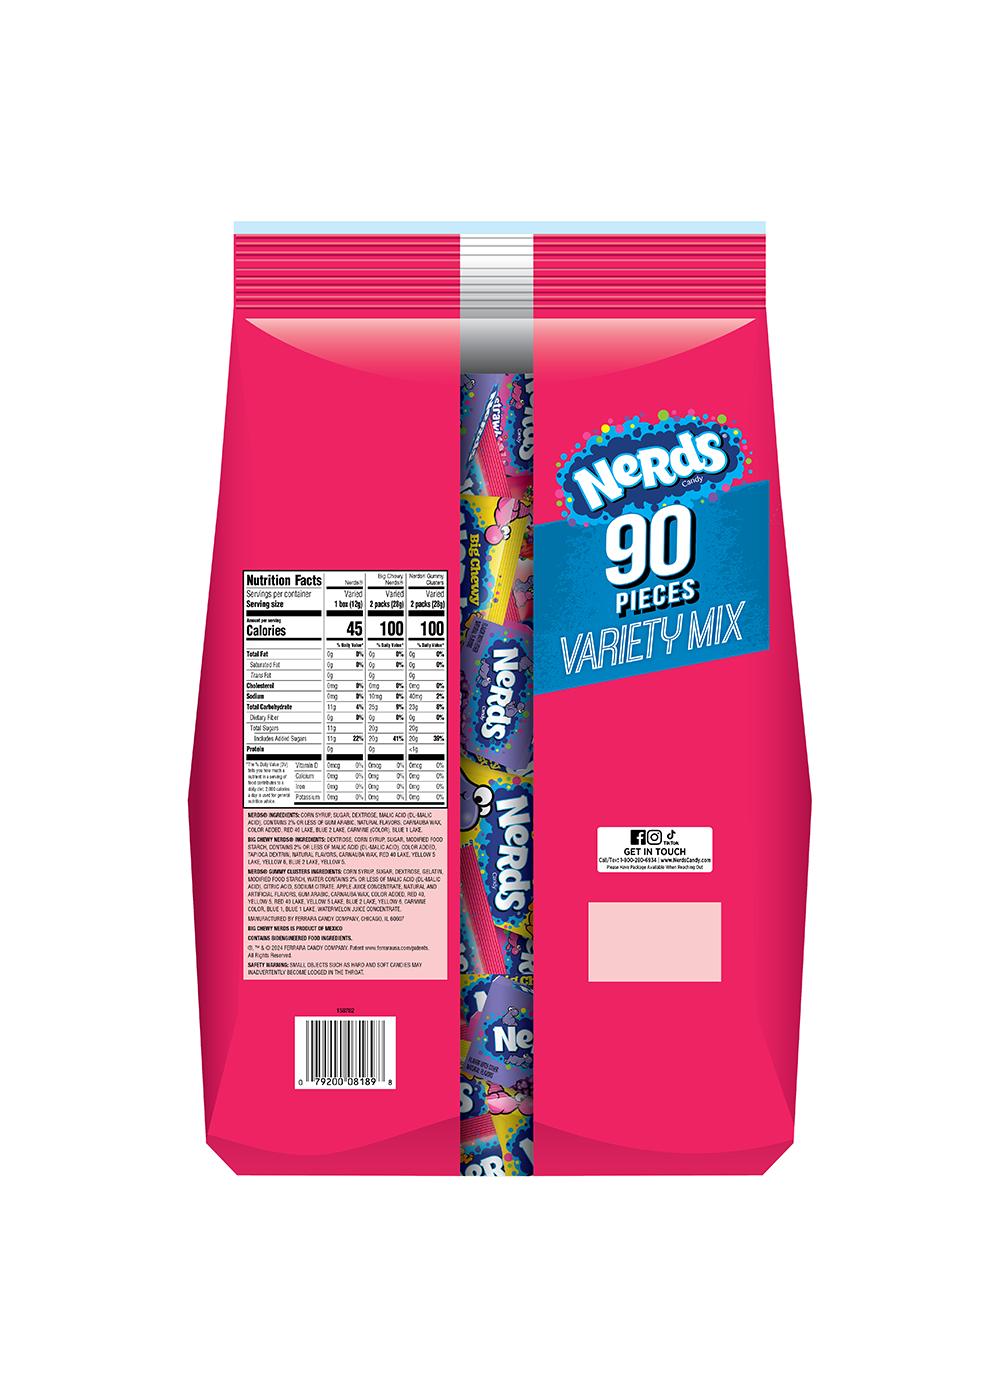 Nerds Variety Mix Candy; image 2 of 2